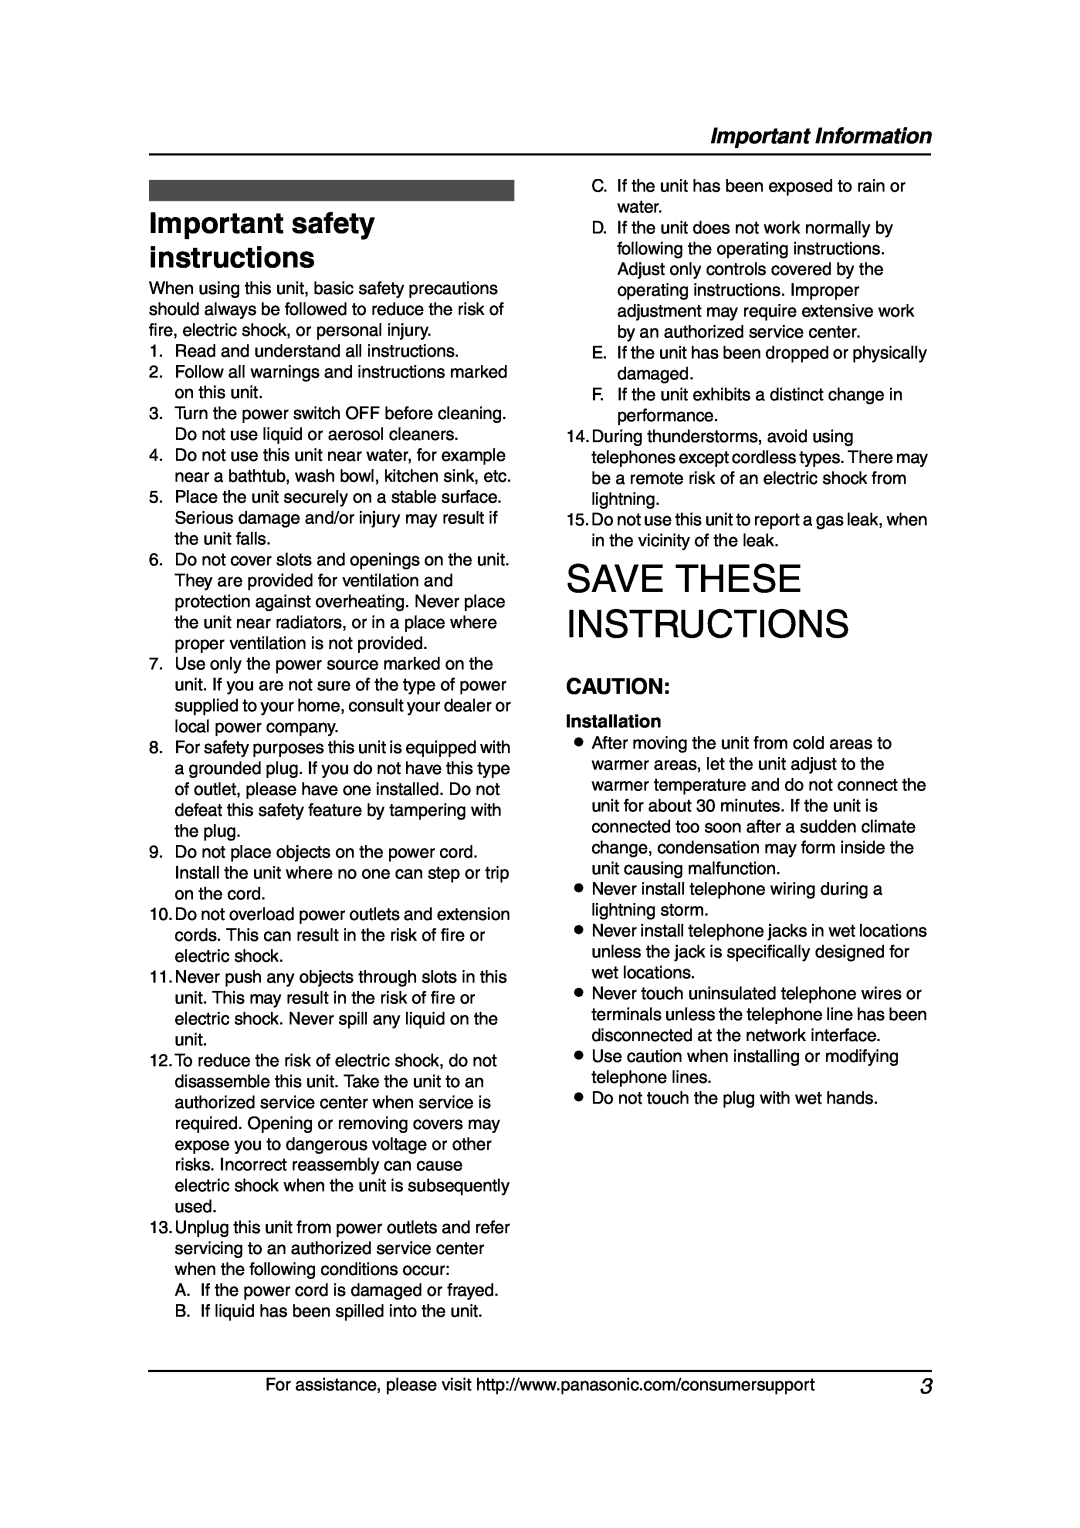 Panasonic KX-FLB851 manual Important safety instructions, Important Information, Installation, Save These Instructions 